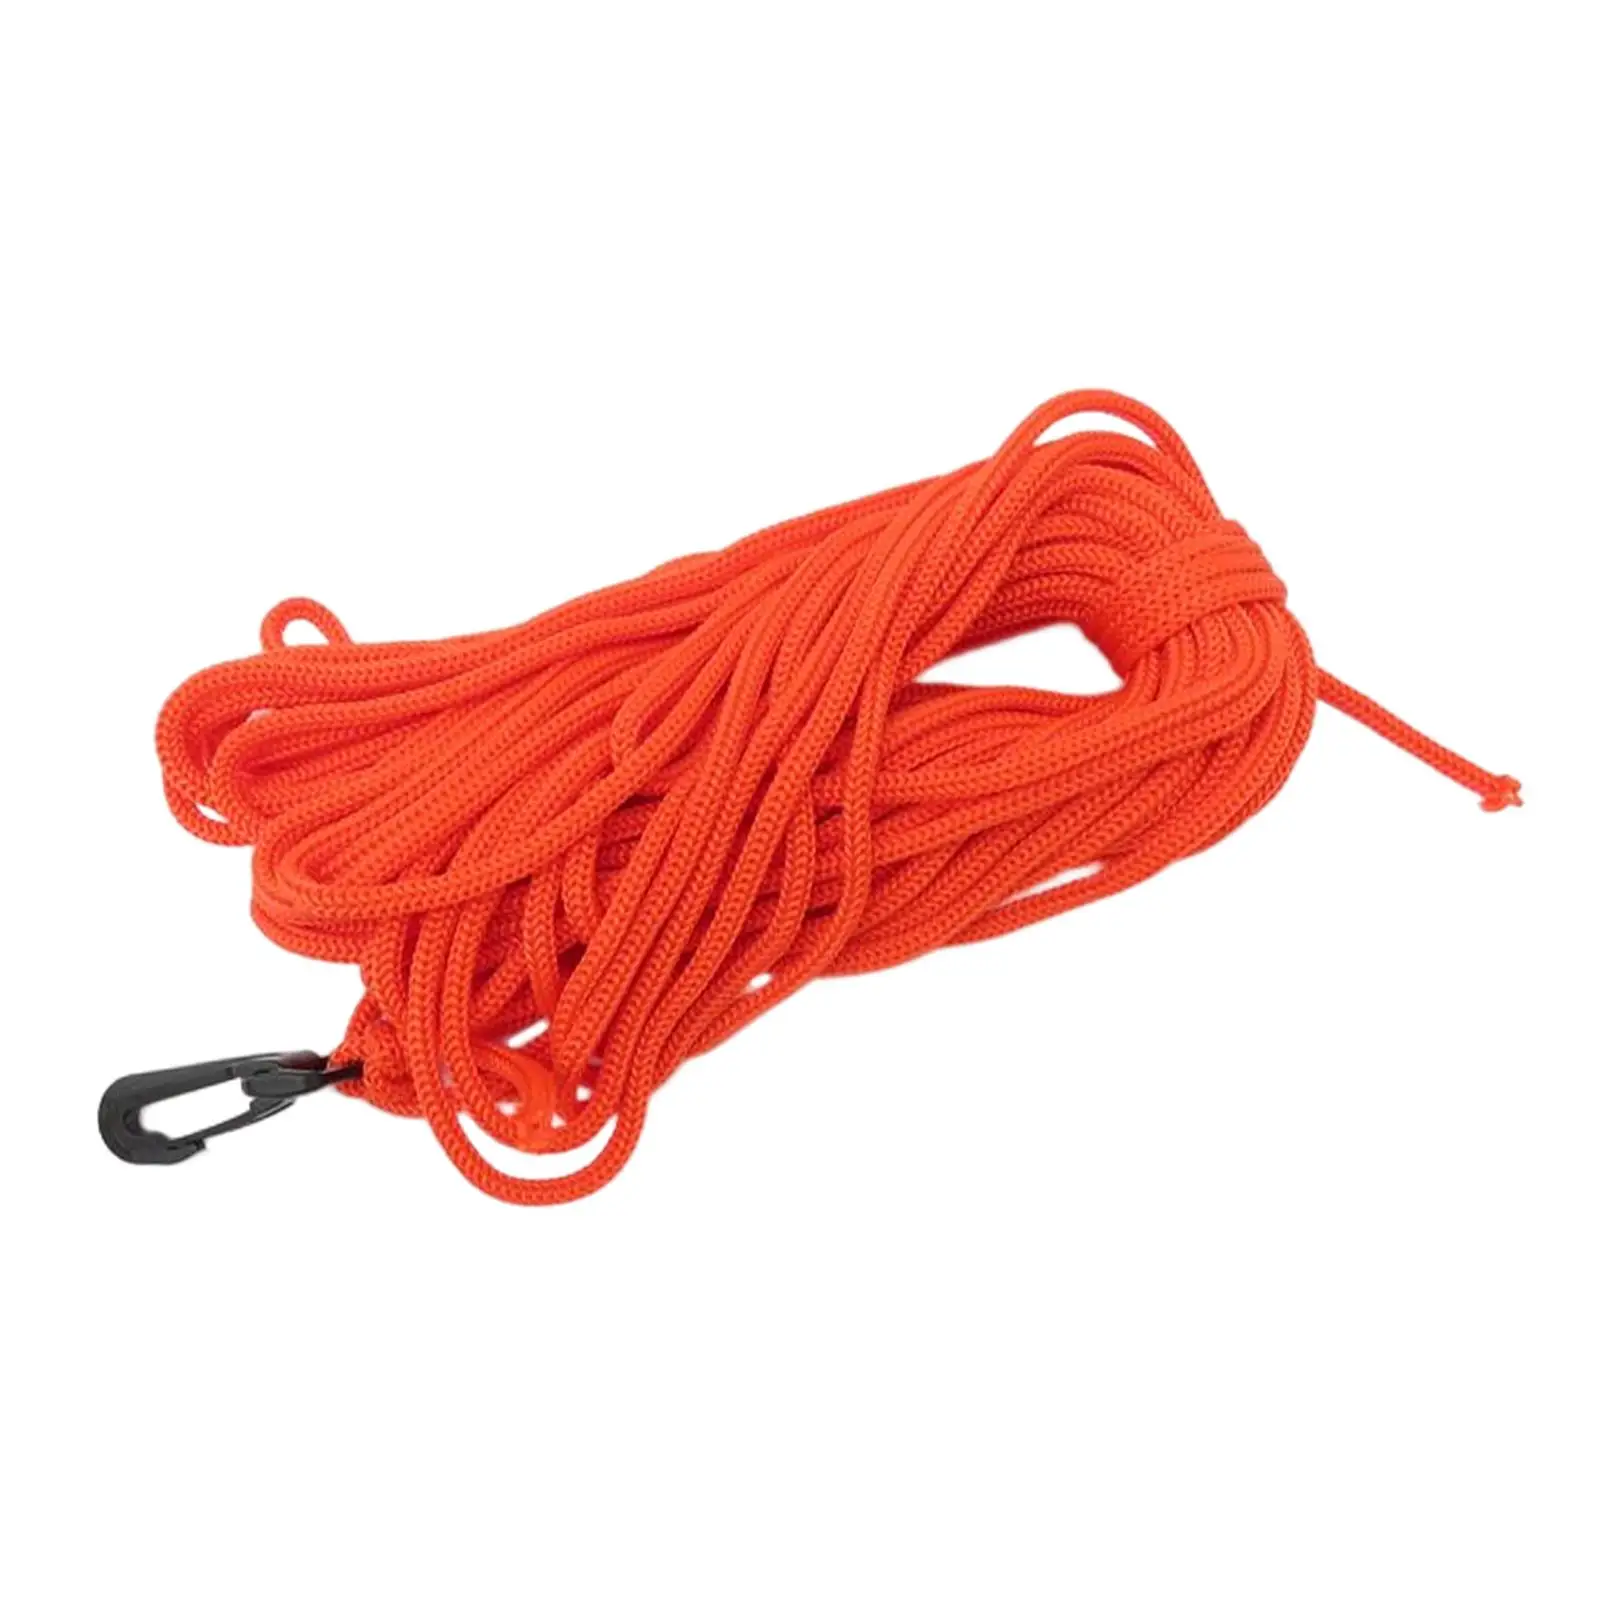 

Float Rope Safety Gear Equipment 21M Rope Portable Dive Rope for Snorkeling Spearfishing Fishing Free Diving Outdoor Accessory